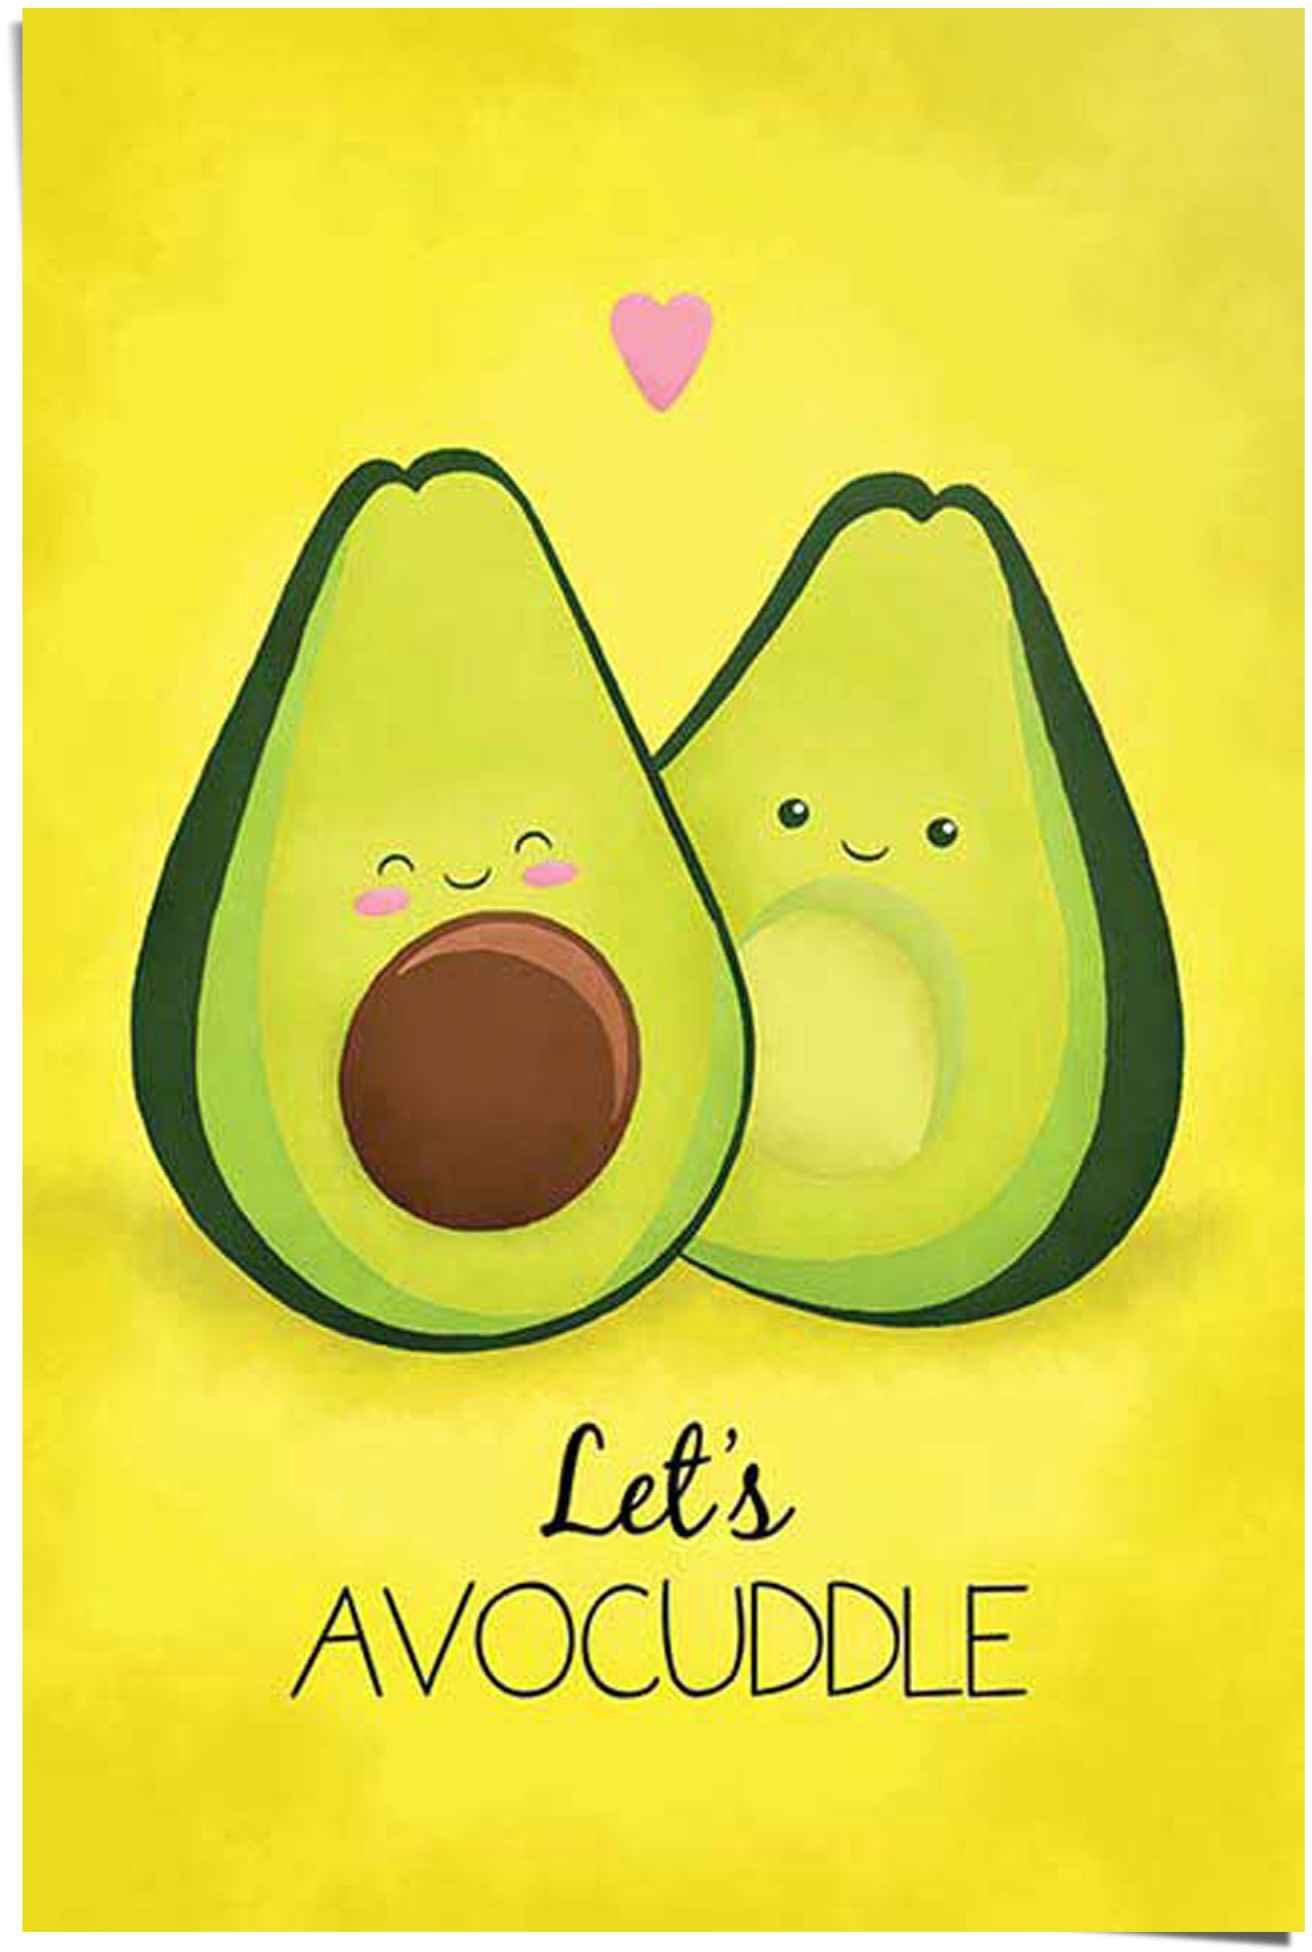 Avocado Poster let´s (1 Reinders! avocuddle, St)